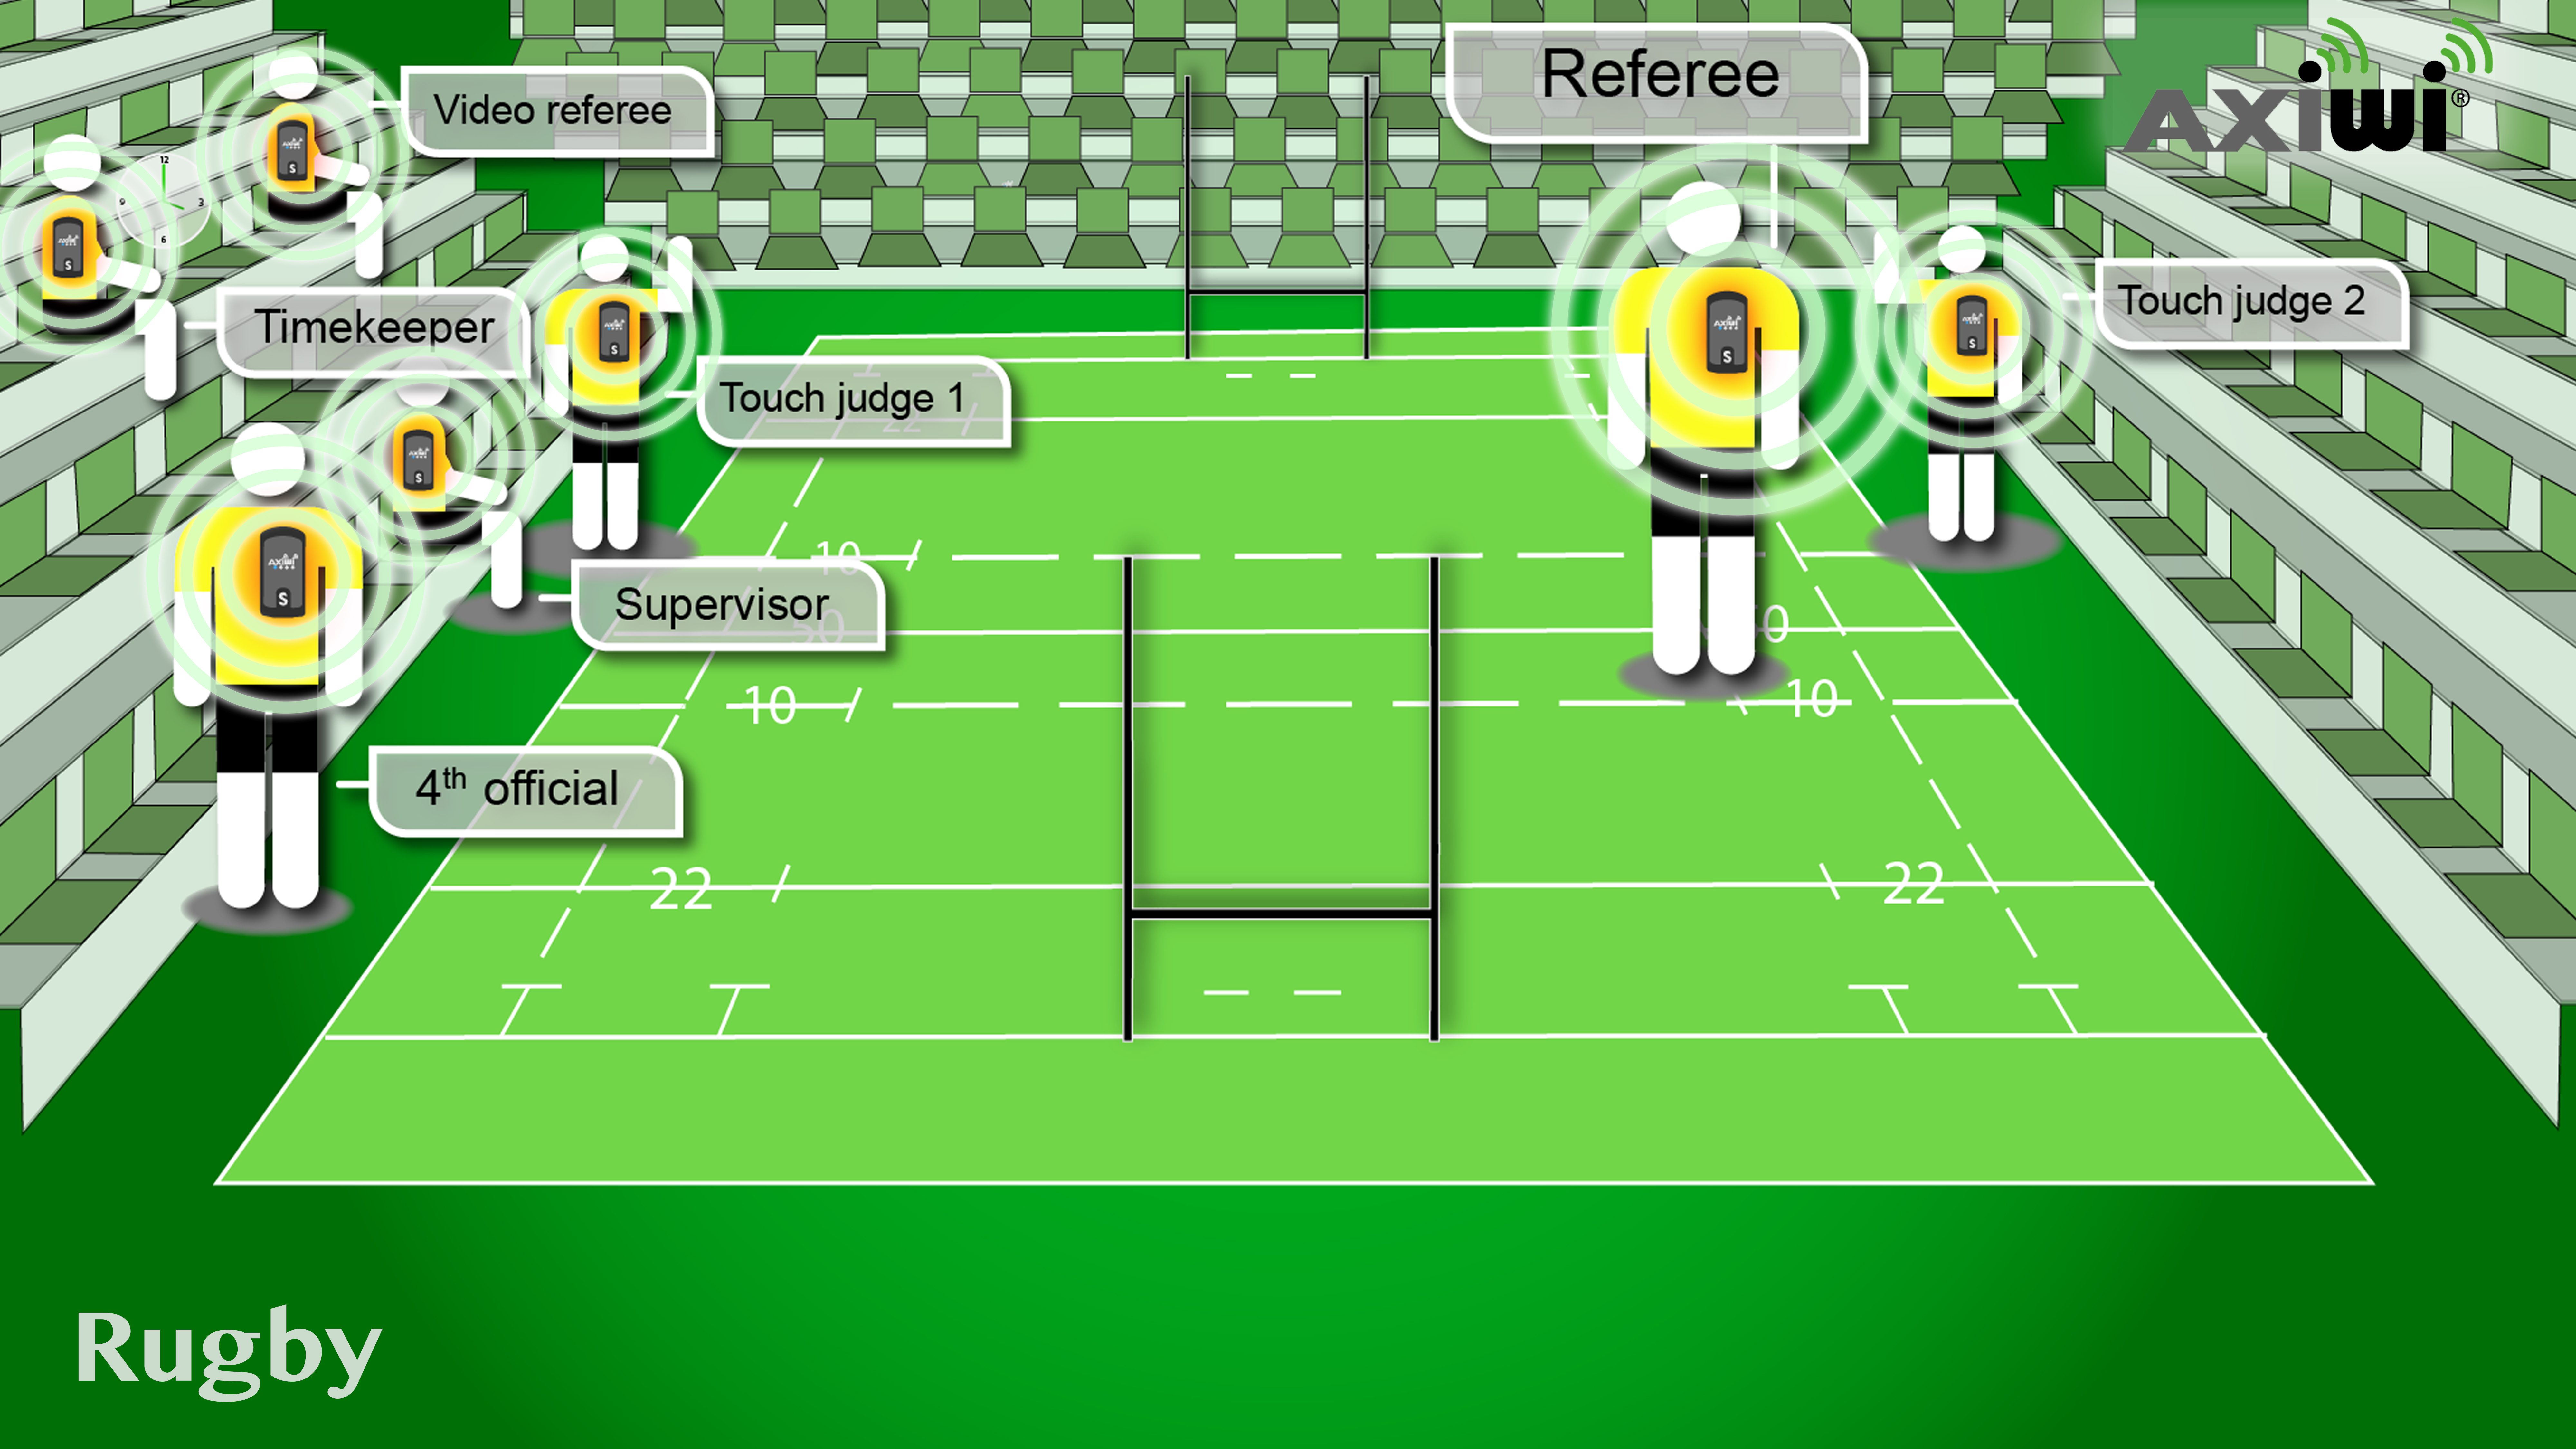 /axiwi-communication-system-referee-rugby